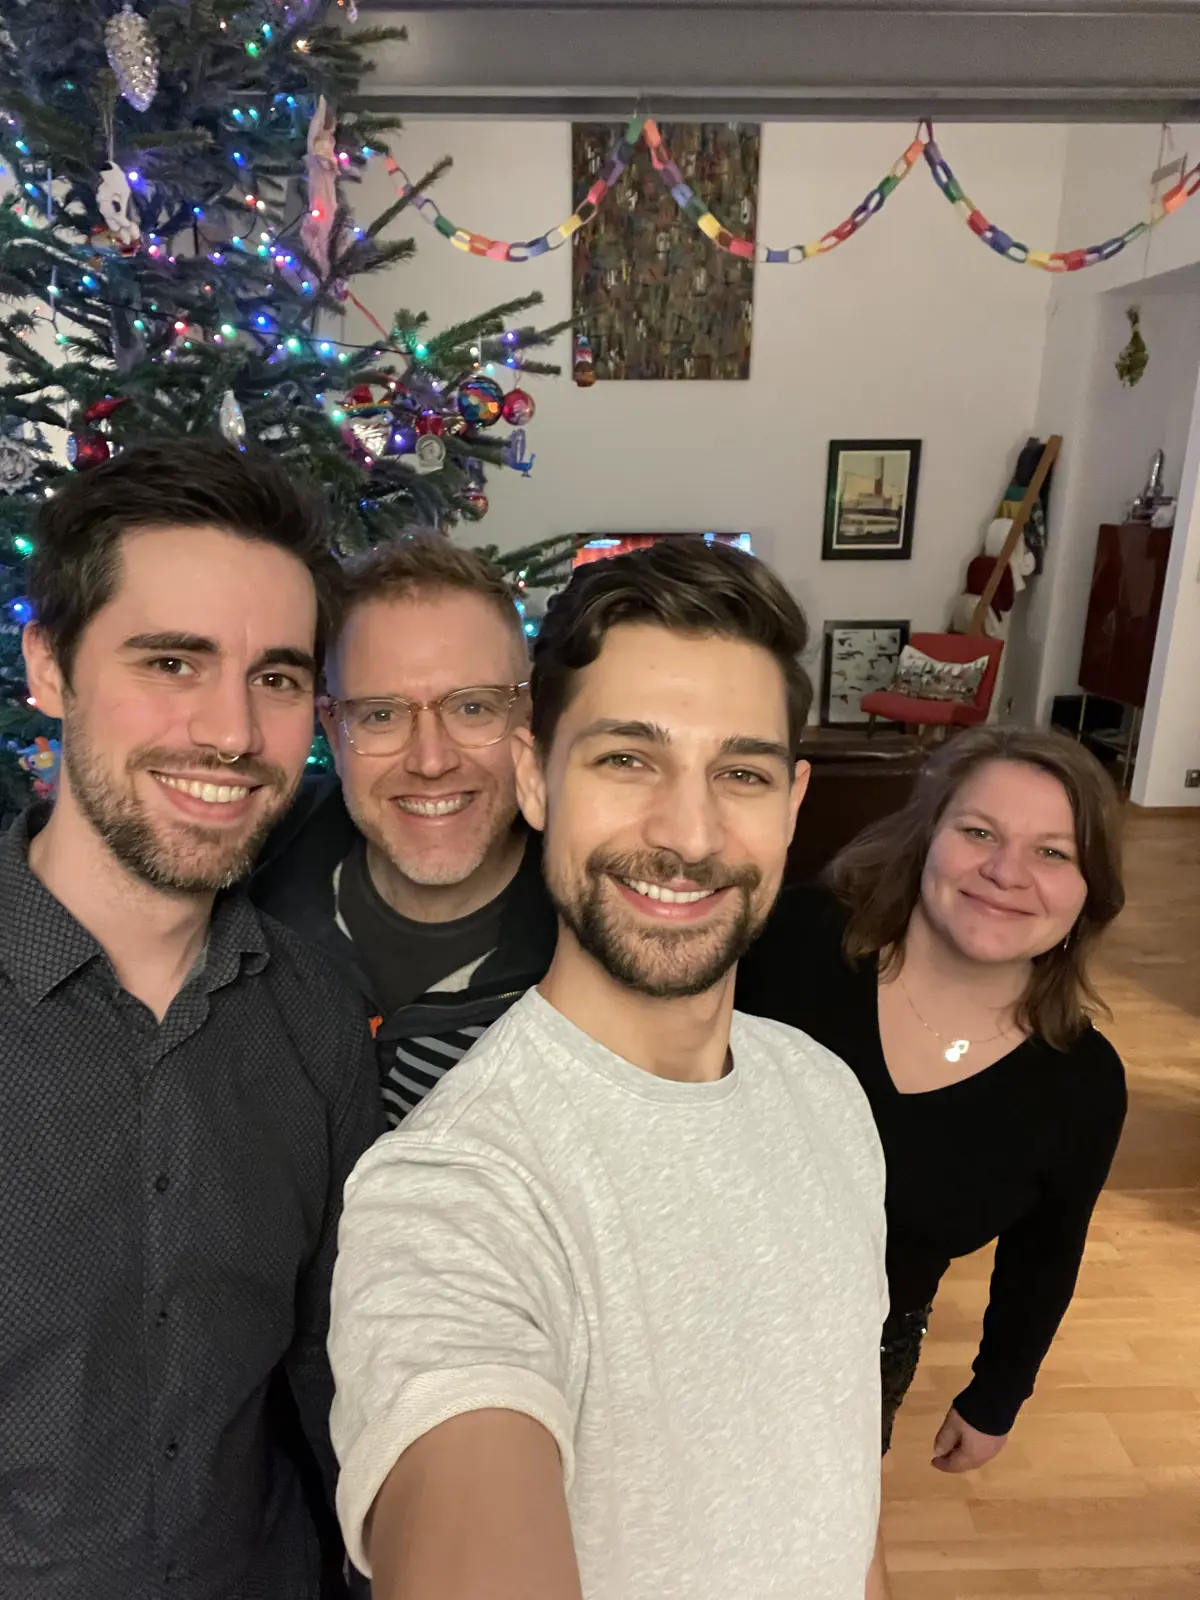 Malte, Arthur, Jeremiah, and Karin smiling in front of Christmas tree